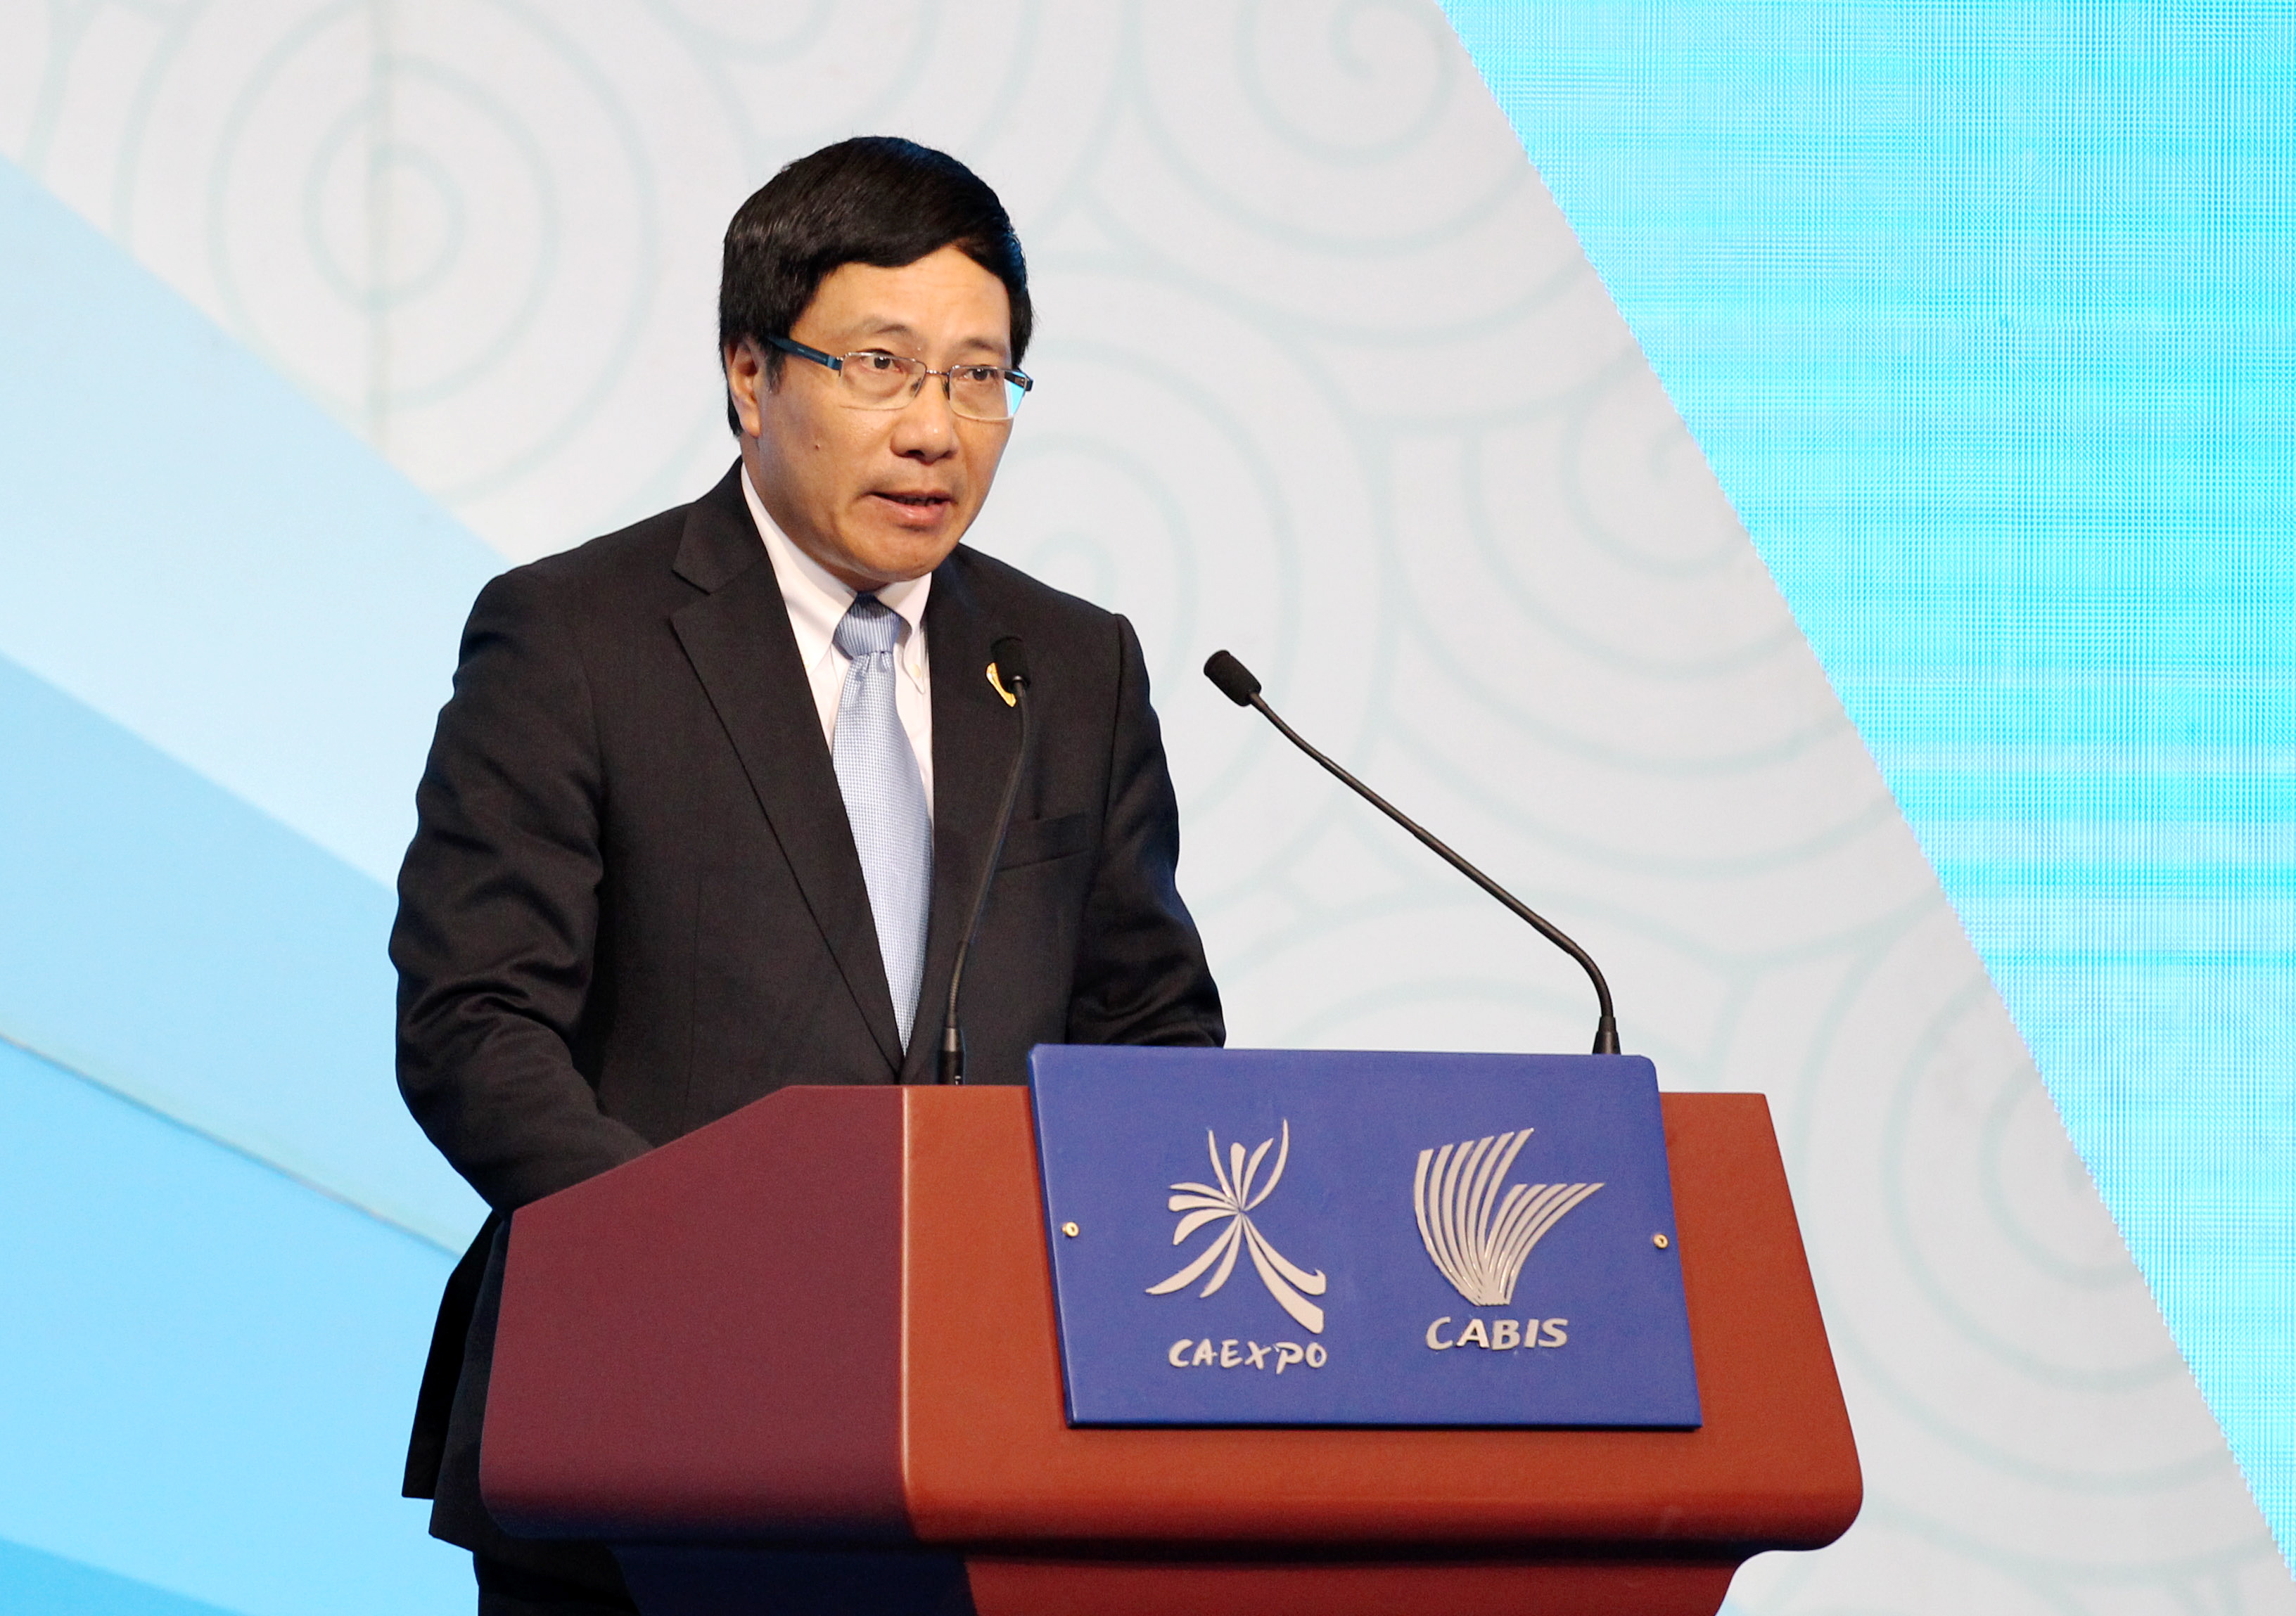 Vietnamese Deputy Prime Minister and Foreign Minister Pham Binh Minh delivers a speech at the opening ceremony of the 11th China-ASEAN Expo and the 11th China-ASEAN Business and Investment Summit in Nanning, China, on Sept.16, 2014 (Peng Huan—Imaginechina)